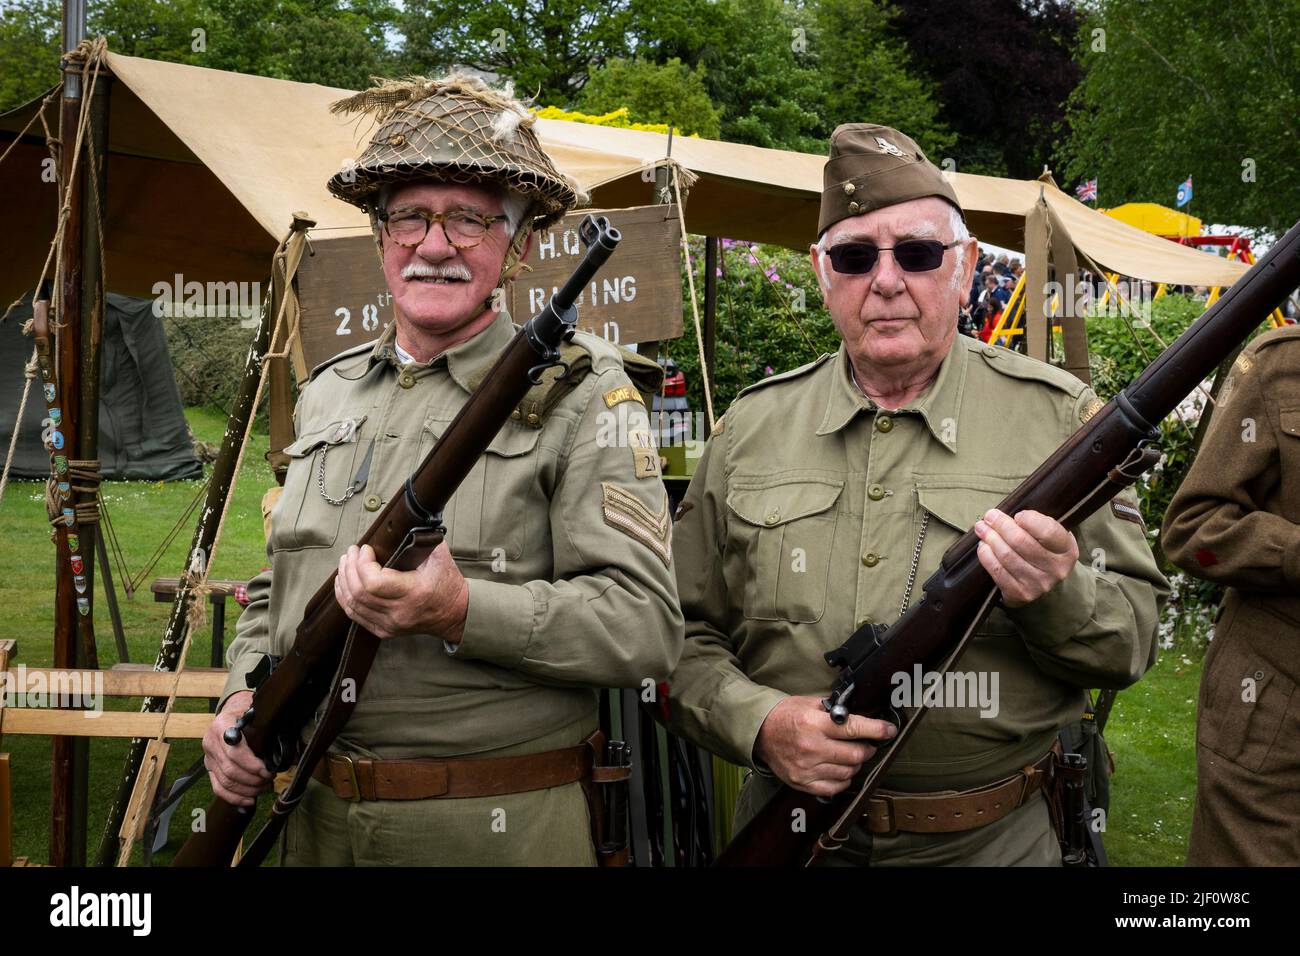 Haworth 1940's living history event (2 men on guard duty, dressed in khaki WW2 Dad's Army costume, encampment & HQ tent) - West Yorkshire, England UK. Stock Photo